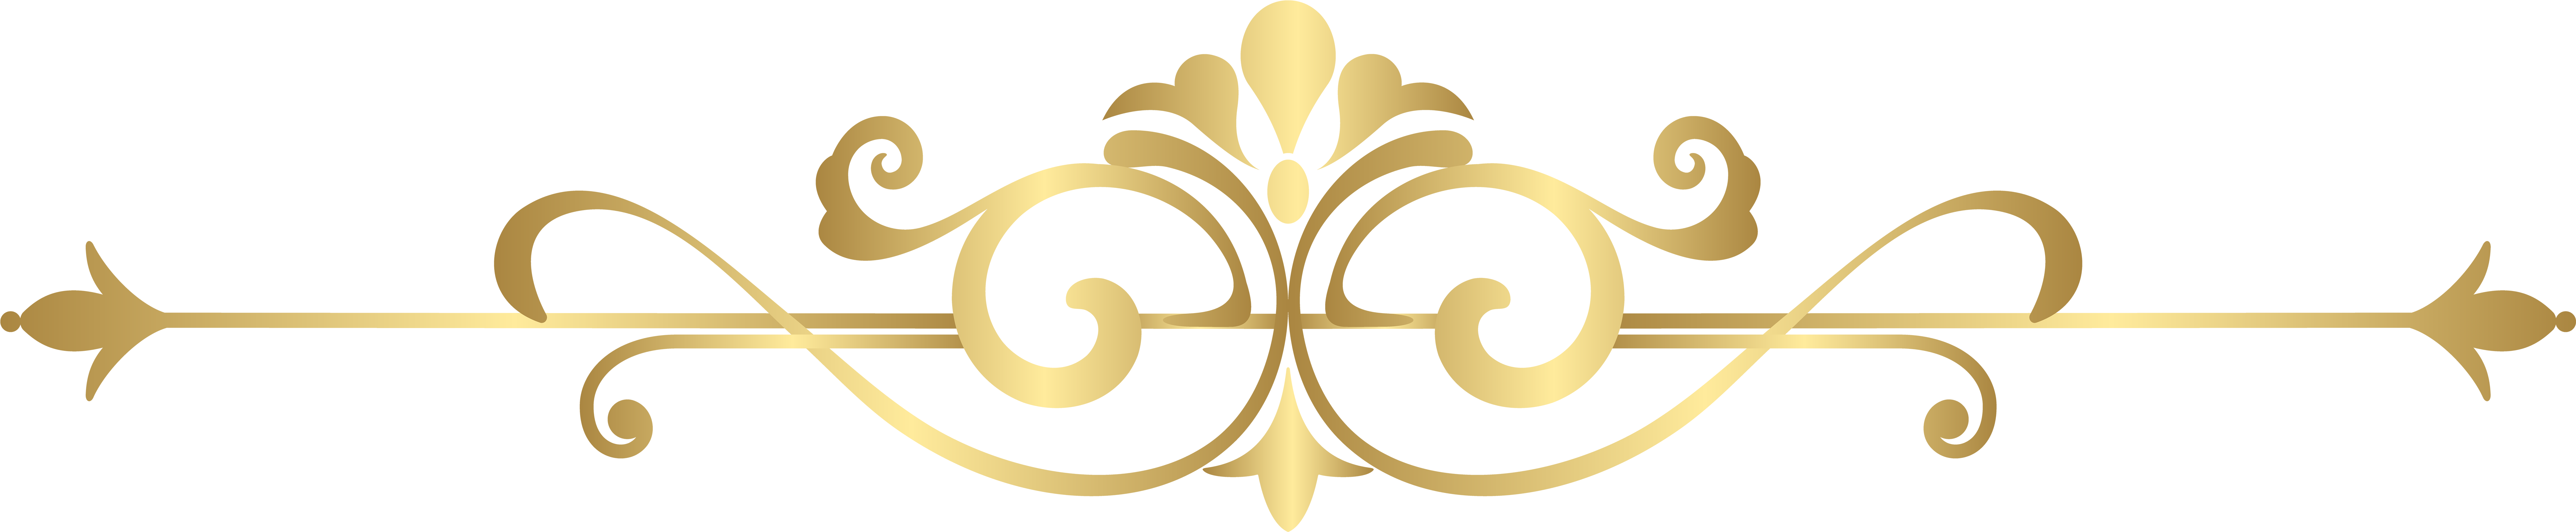 Decorative Line Gold Free PNG